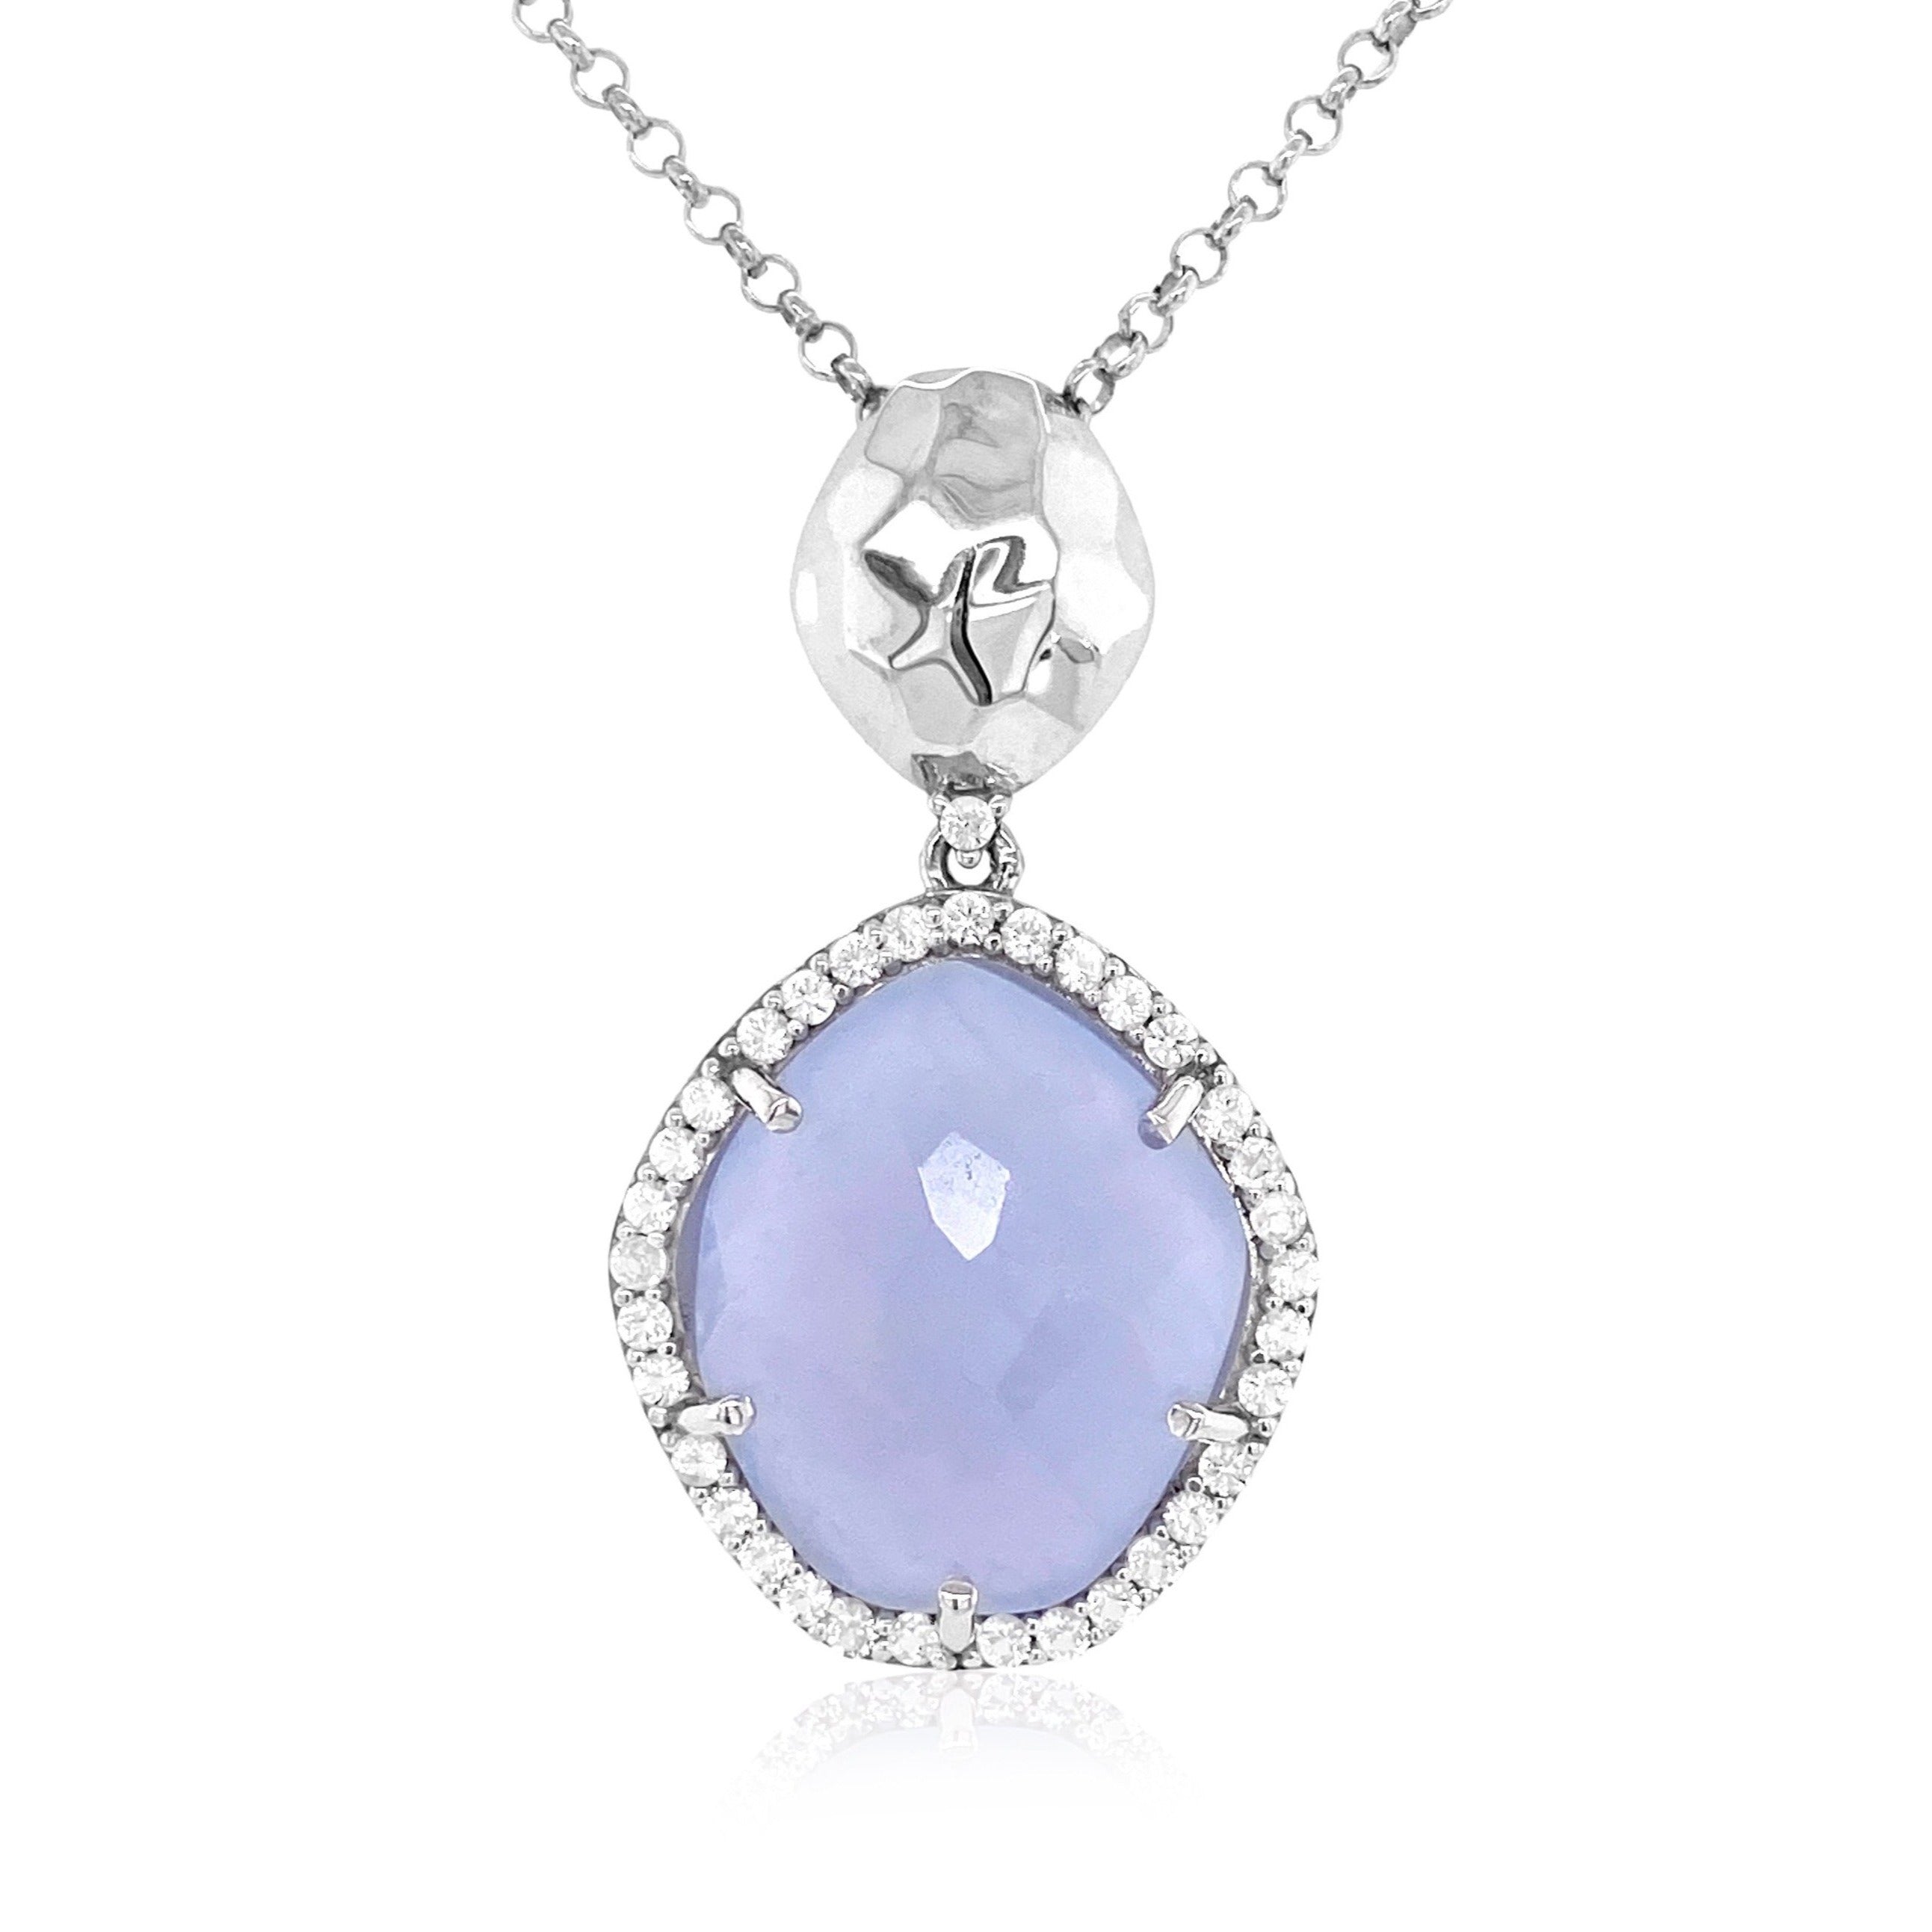 PANORAMA Necklace (1260) - Blue Chalcedony / SS